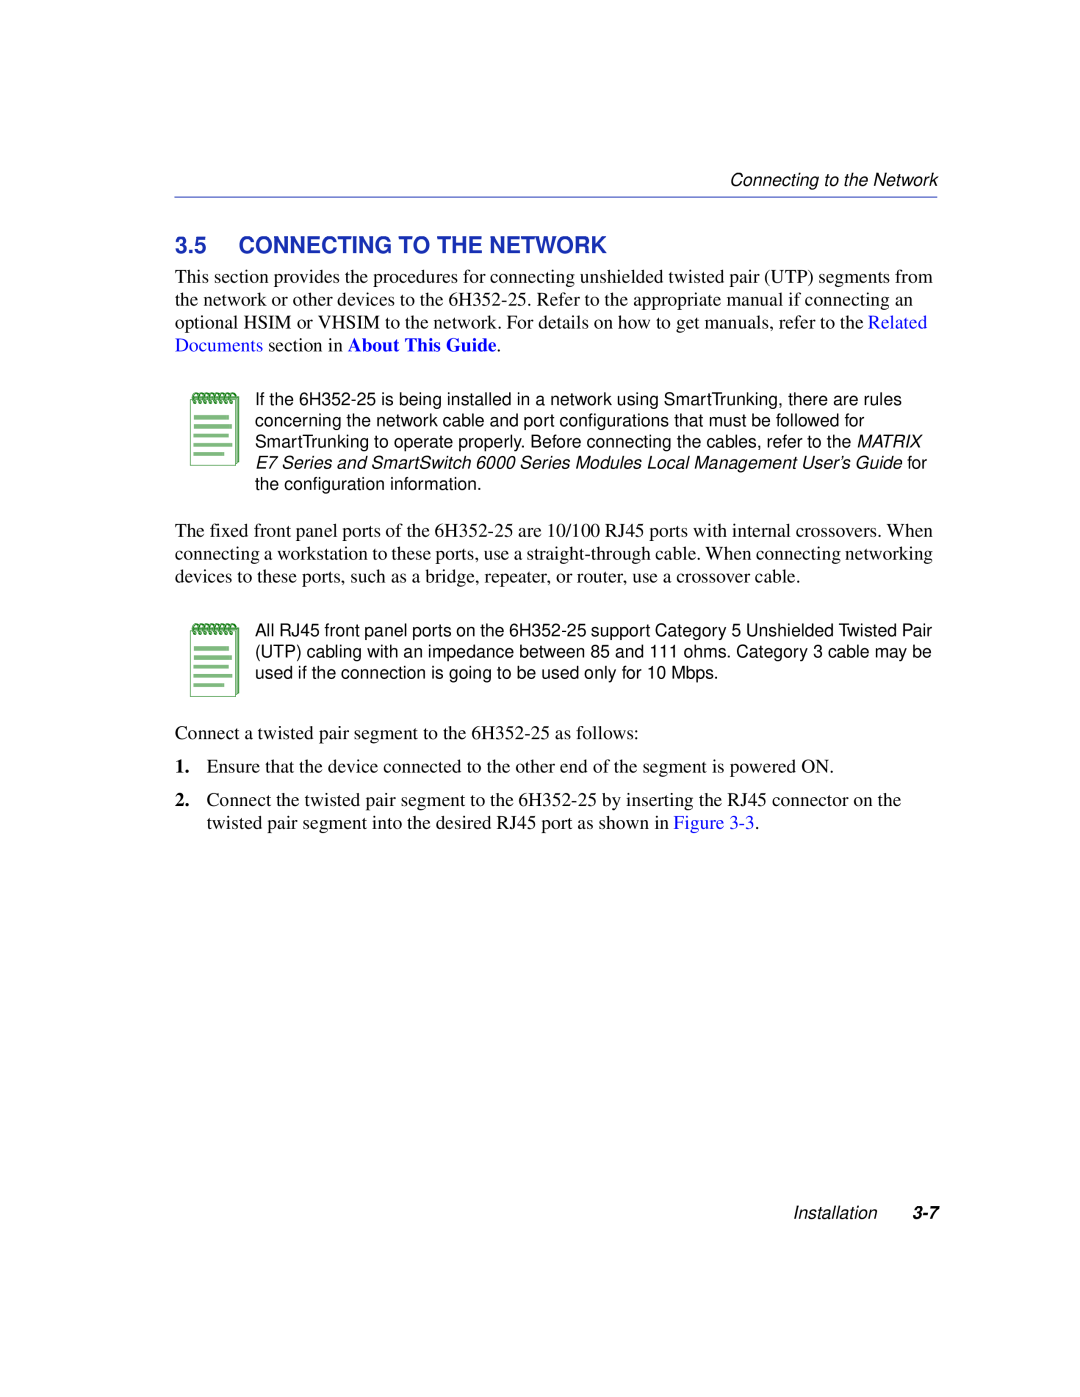 Enterasys Networks 6H352-25 manual Connecting To The Network 